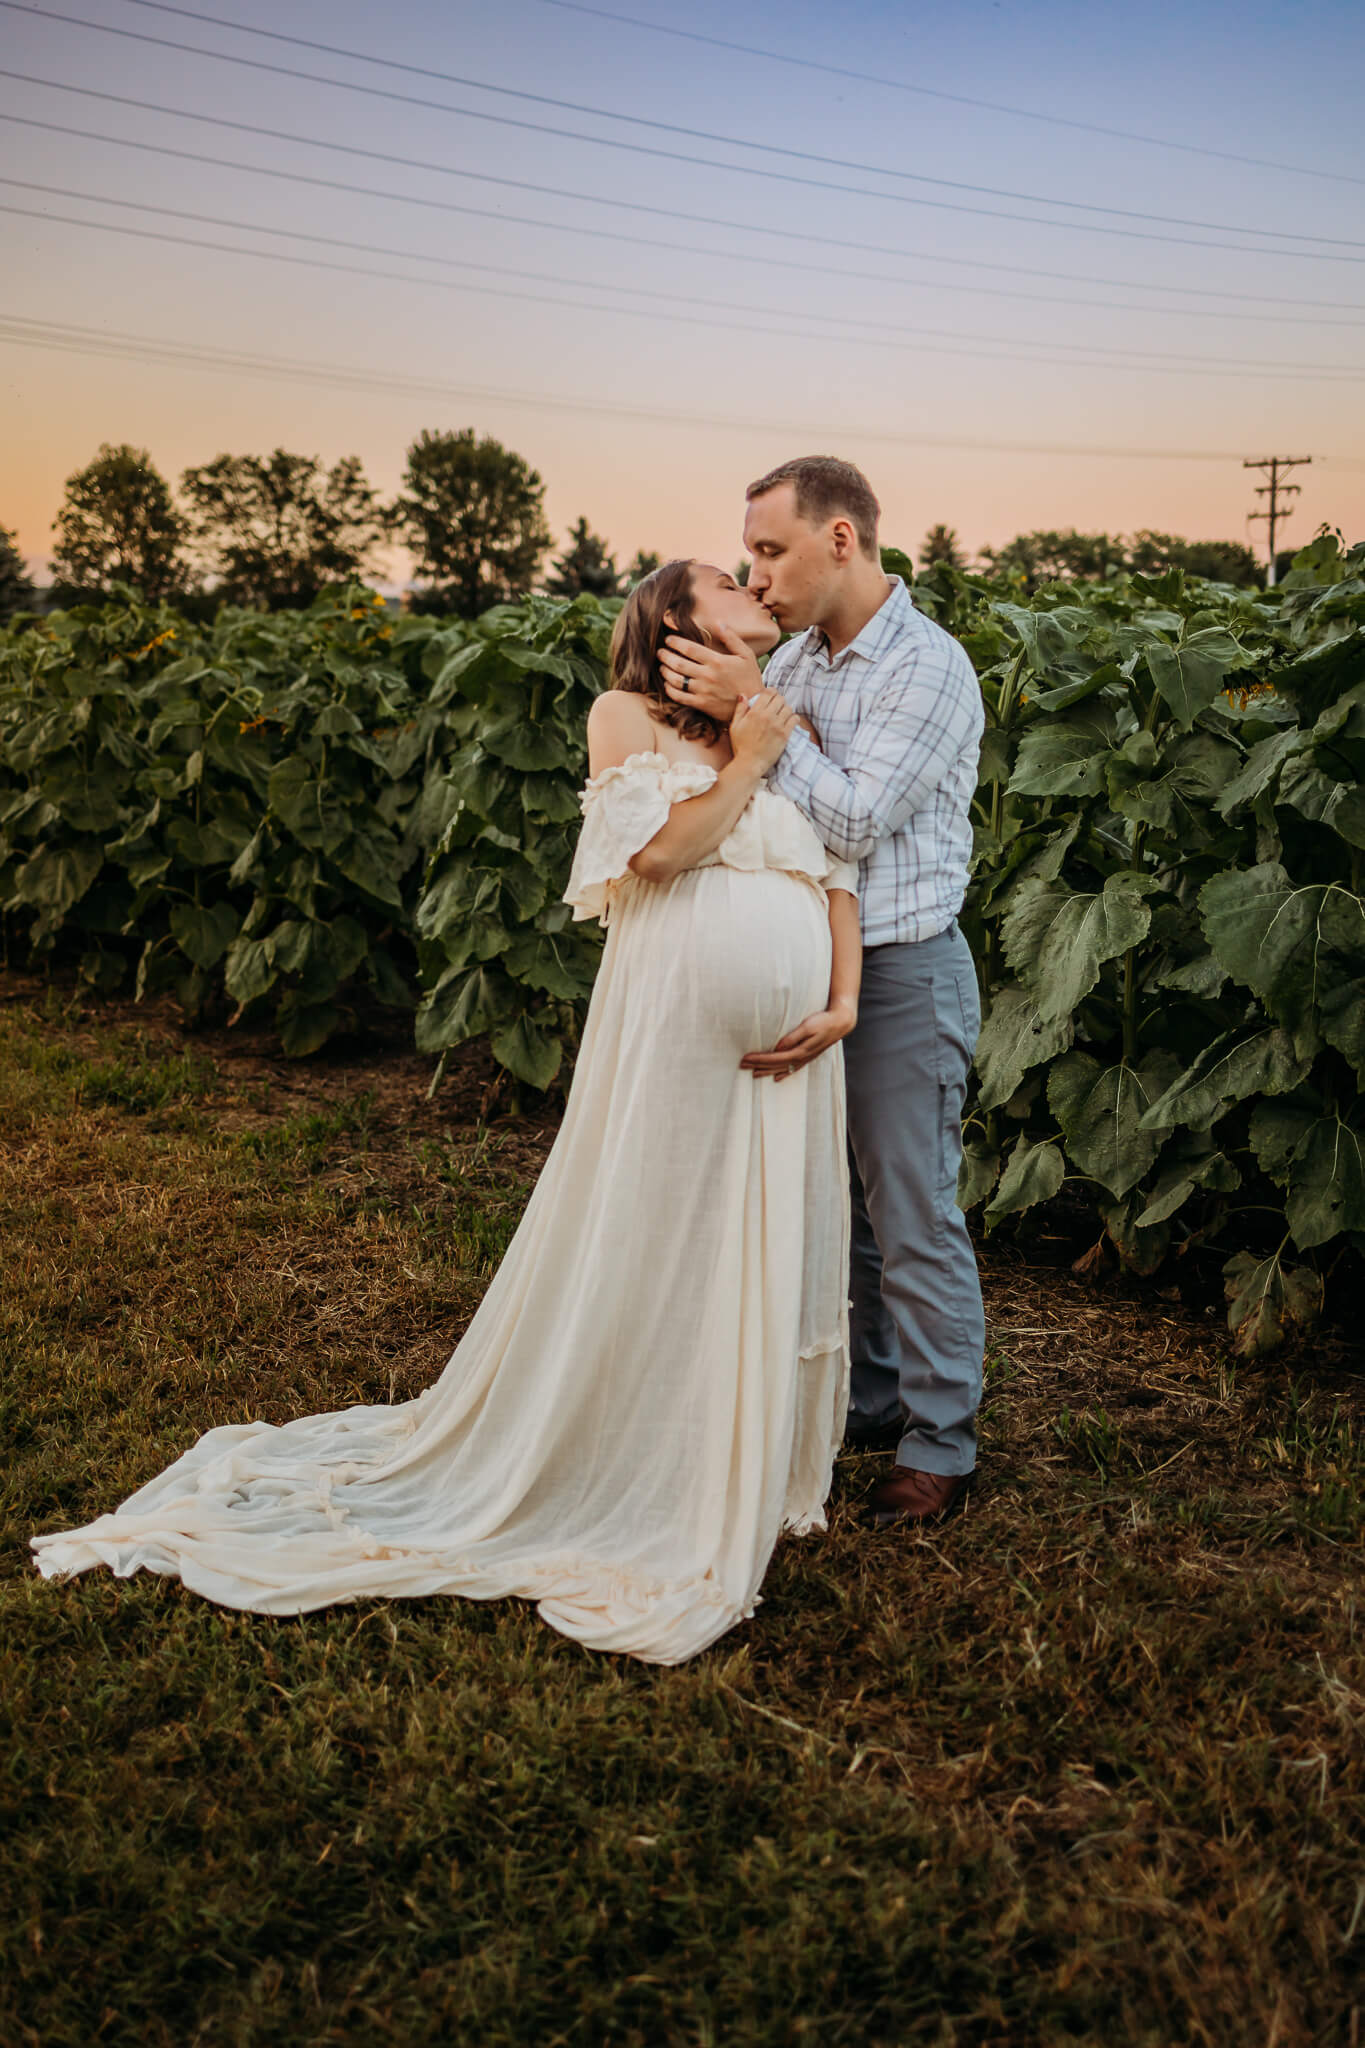 A mother to be in a long white maternity gown leans back for a kiss from her husband in a sunflower field at sunset thanks to acupuncture eau claire